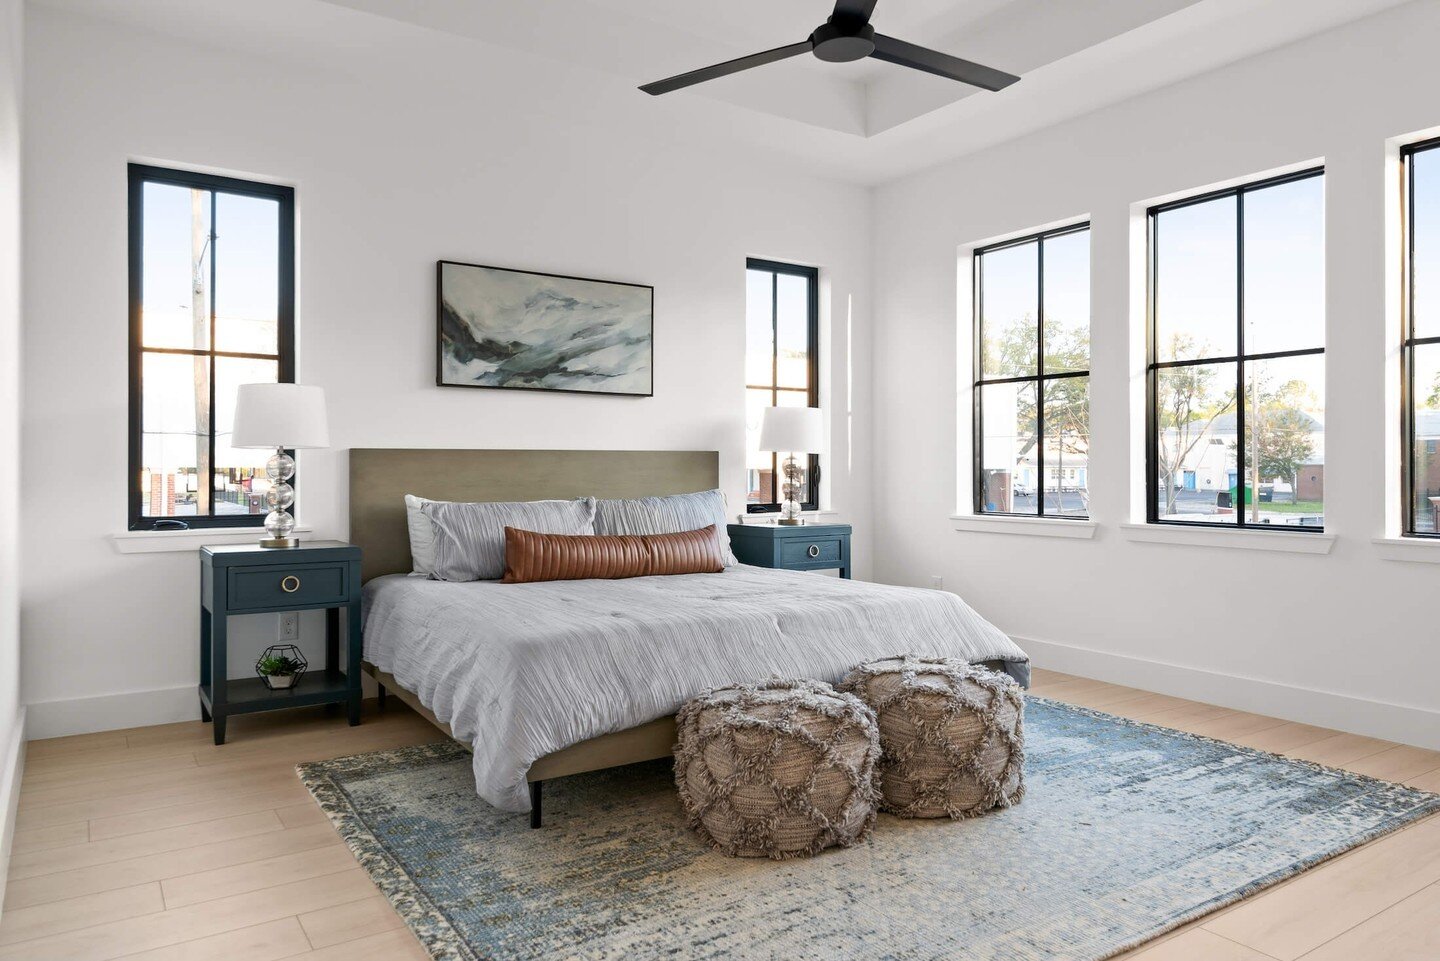 Are you a fan of light and bright bedrooms, or more muted and cozy ones? I can go either way! Regardless of the bedroom's style, cleaning out all the clutter, opening windows, and making the bed go far in presenting the space in its best light. 📸🌟